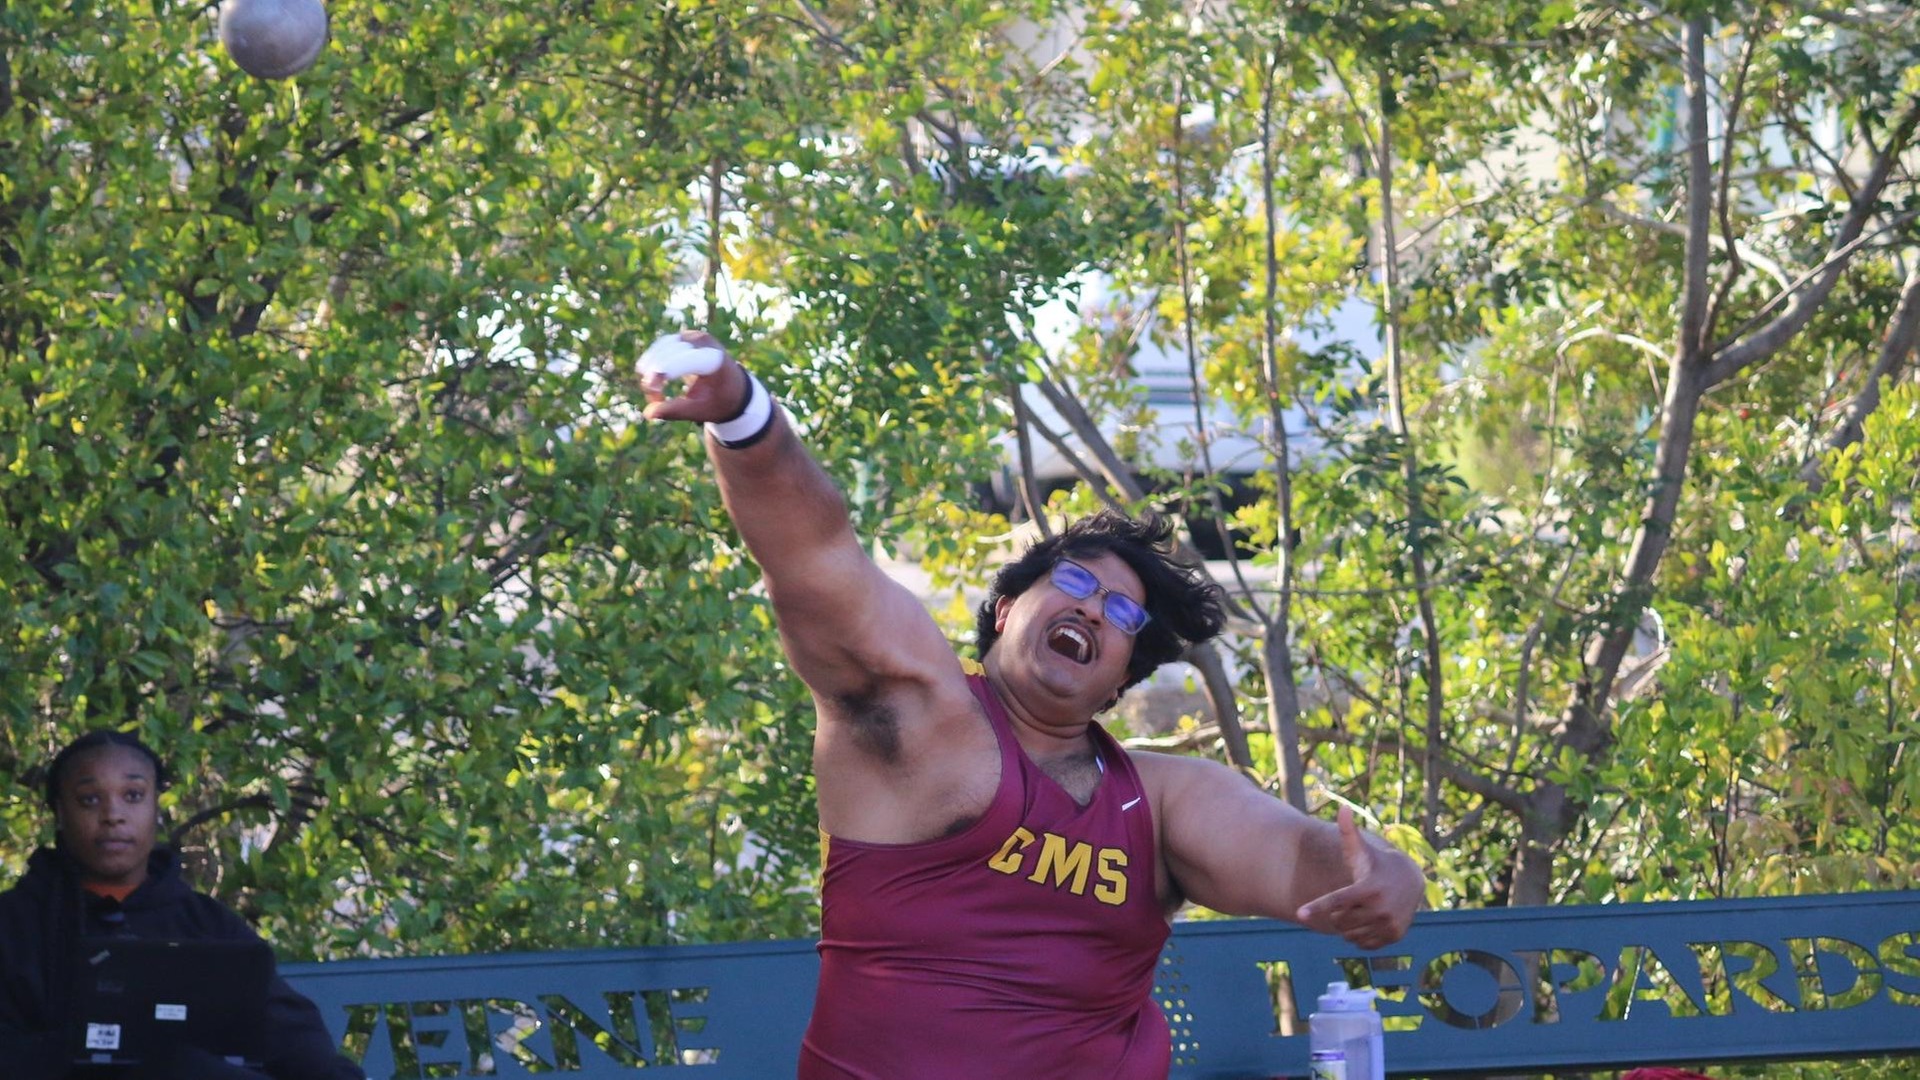 Sarath Kakani was the first-place finisher in the shot put